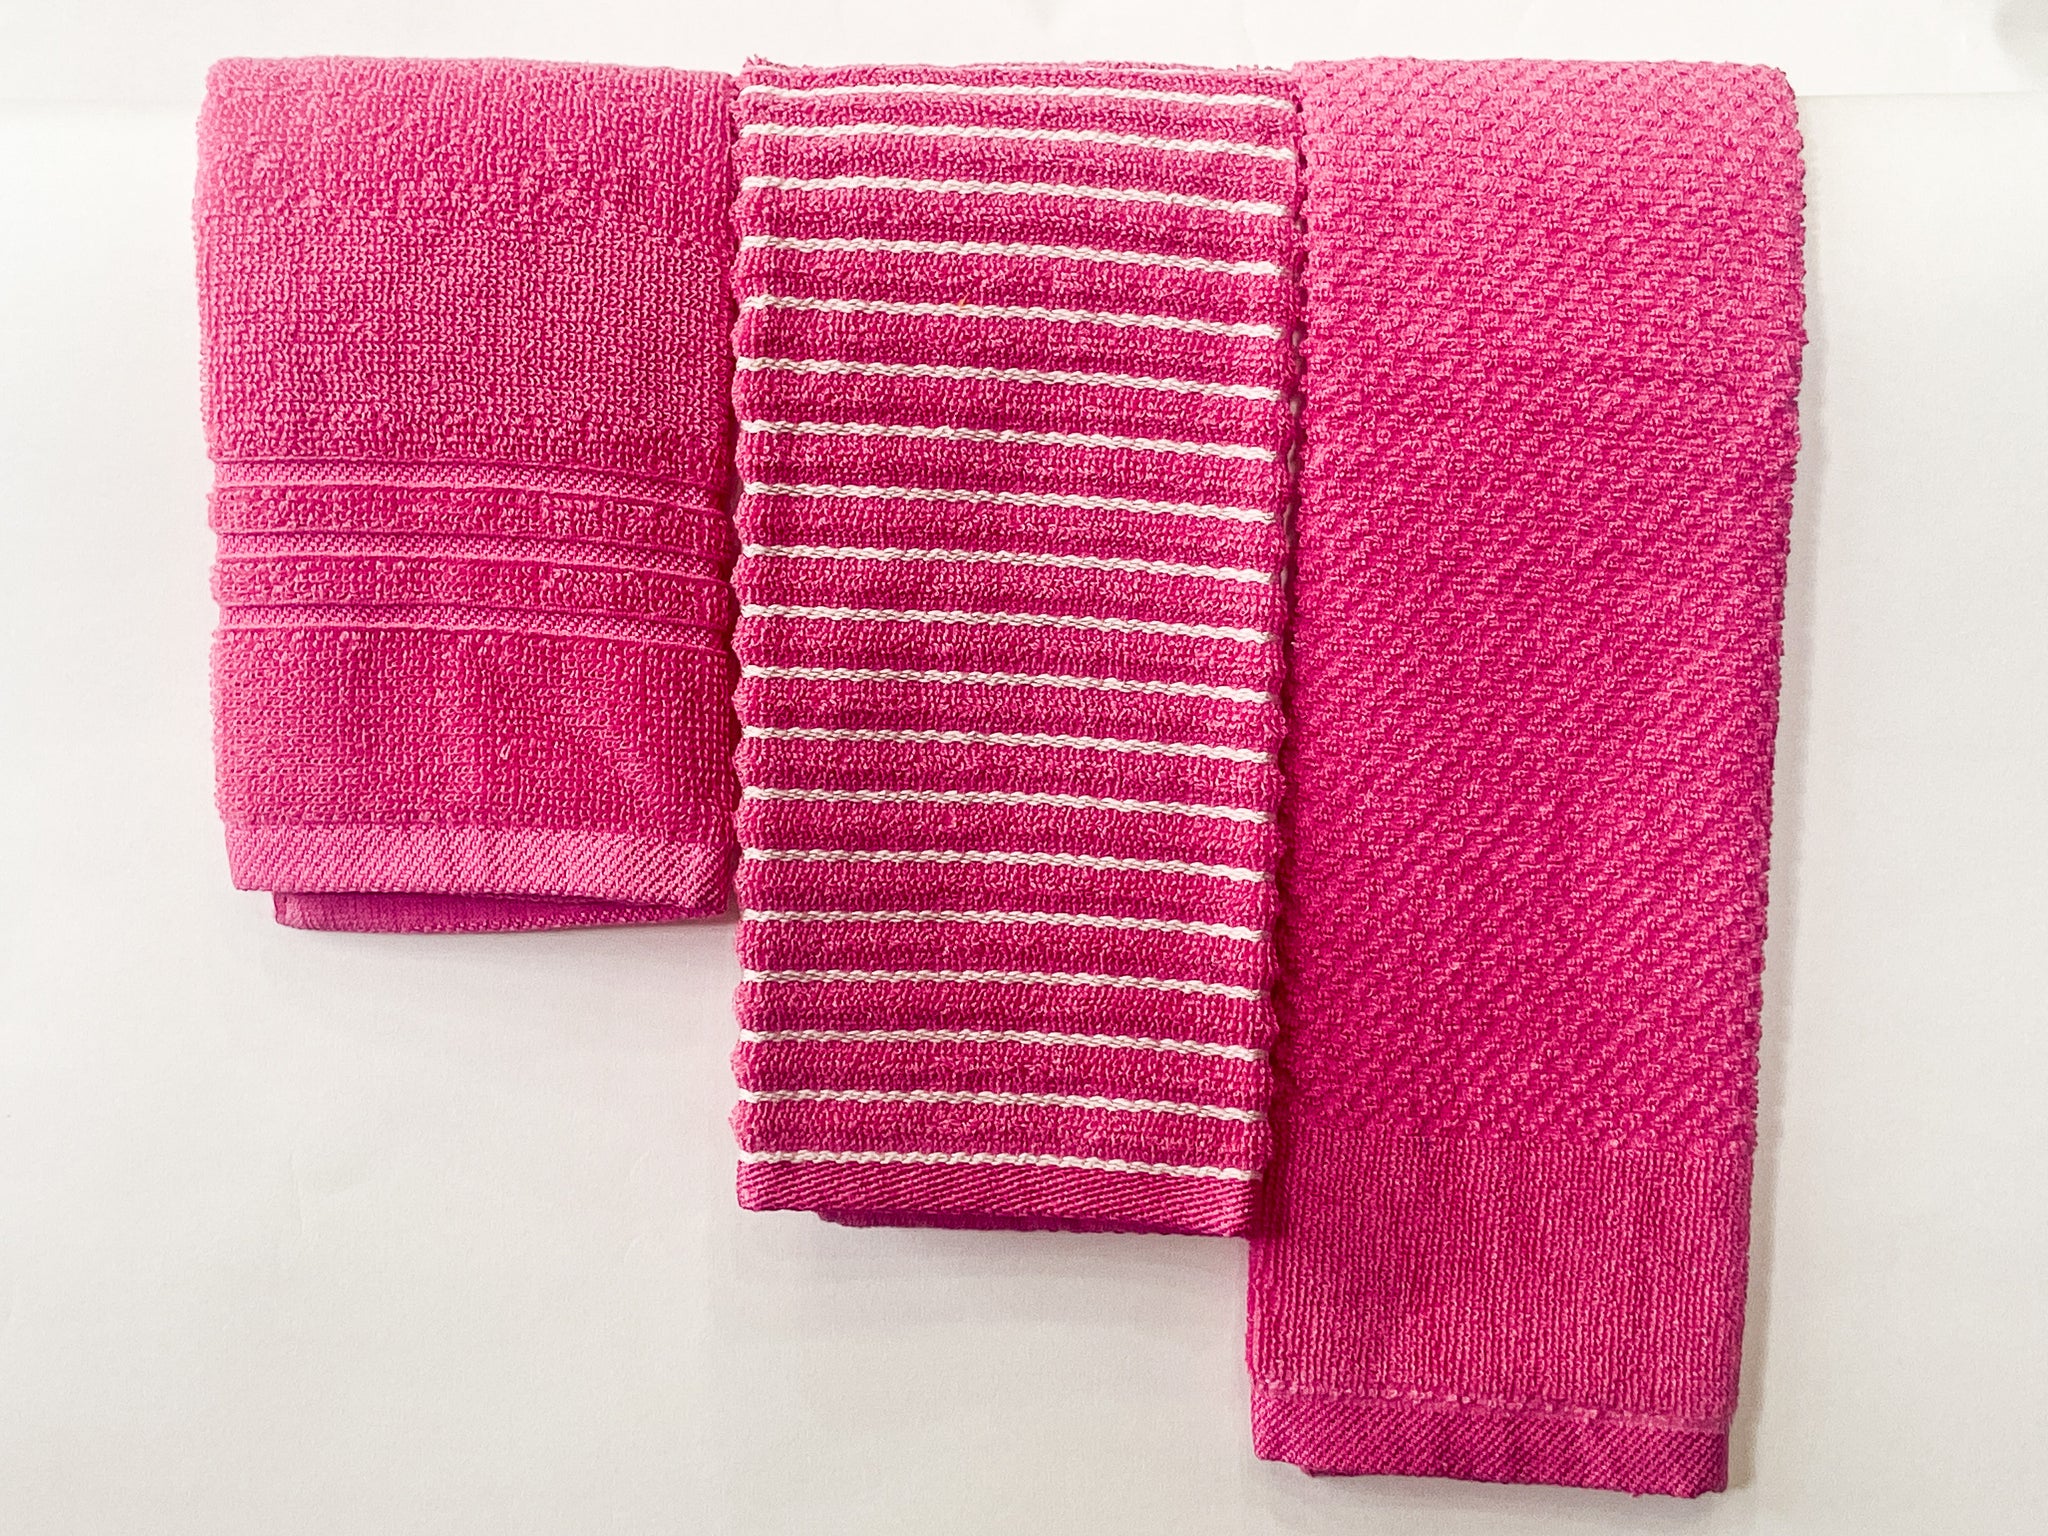 Lushomes Cotton Kitchen Towels, Hand Towel Set of 6, Napkin for Hand Towels, hand towel for wash basin, face towel for men  (Pack of 3, 34 x 51 cms, Fuchsia)